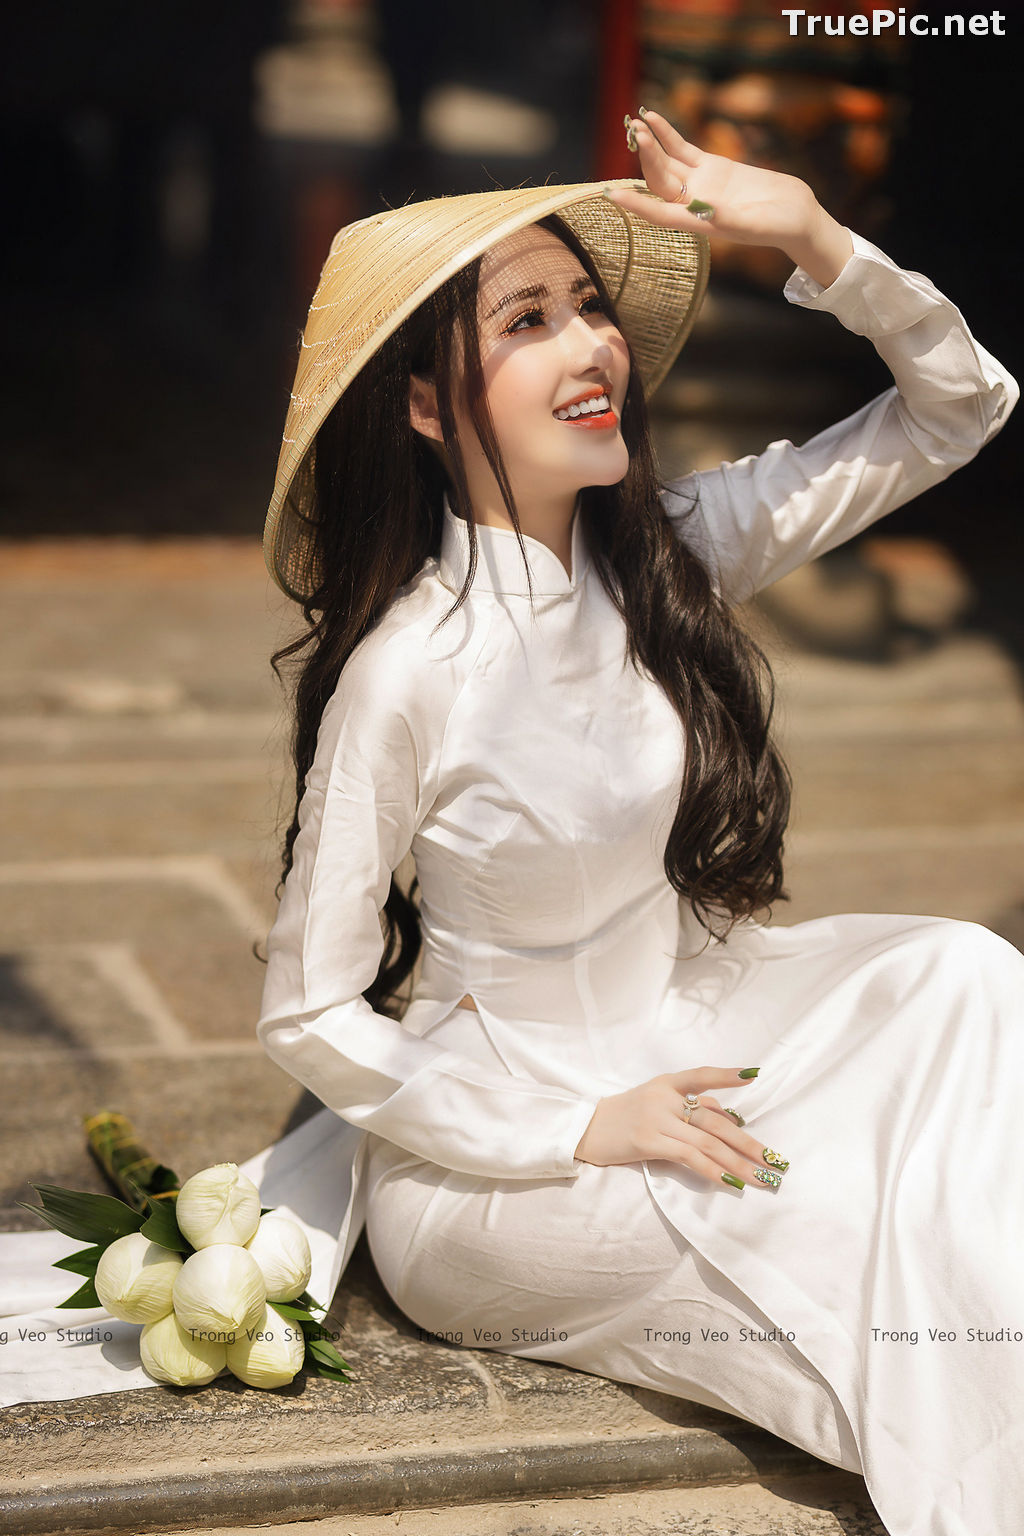 Image The Beauty of Vietnamese Girls with Traditional Dress (Ao Dai) #2 - TruePic.net - Picture-21